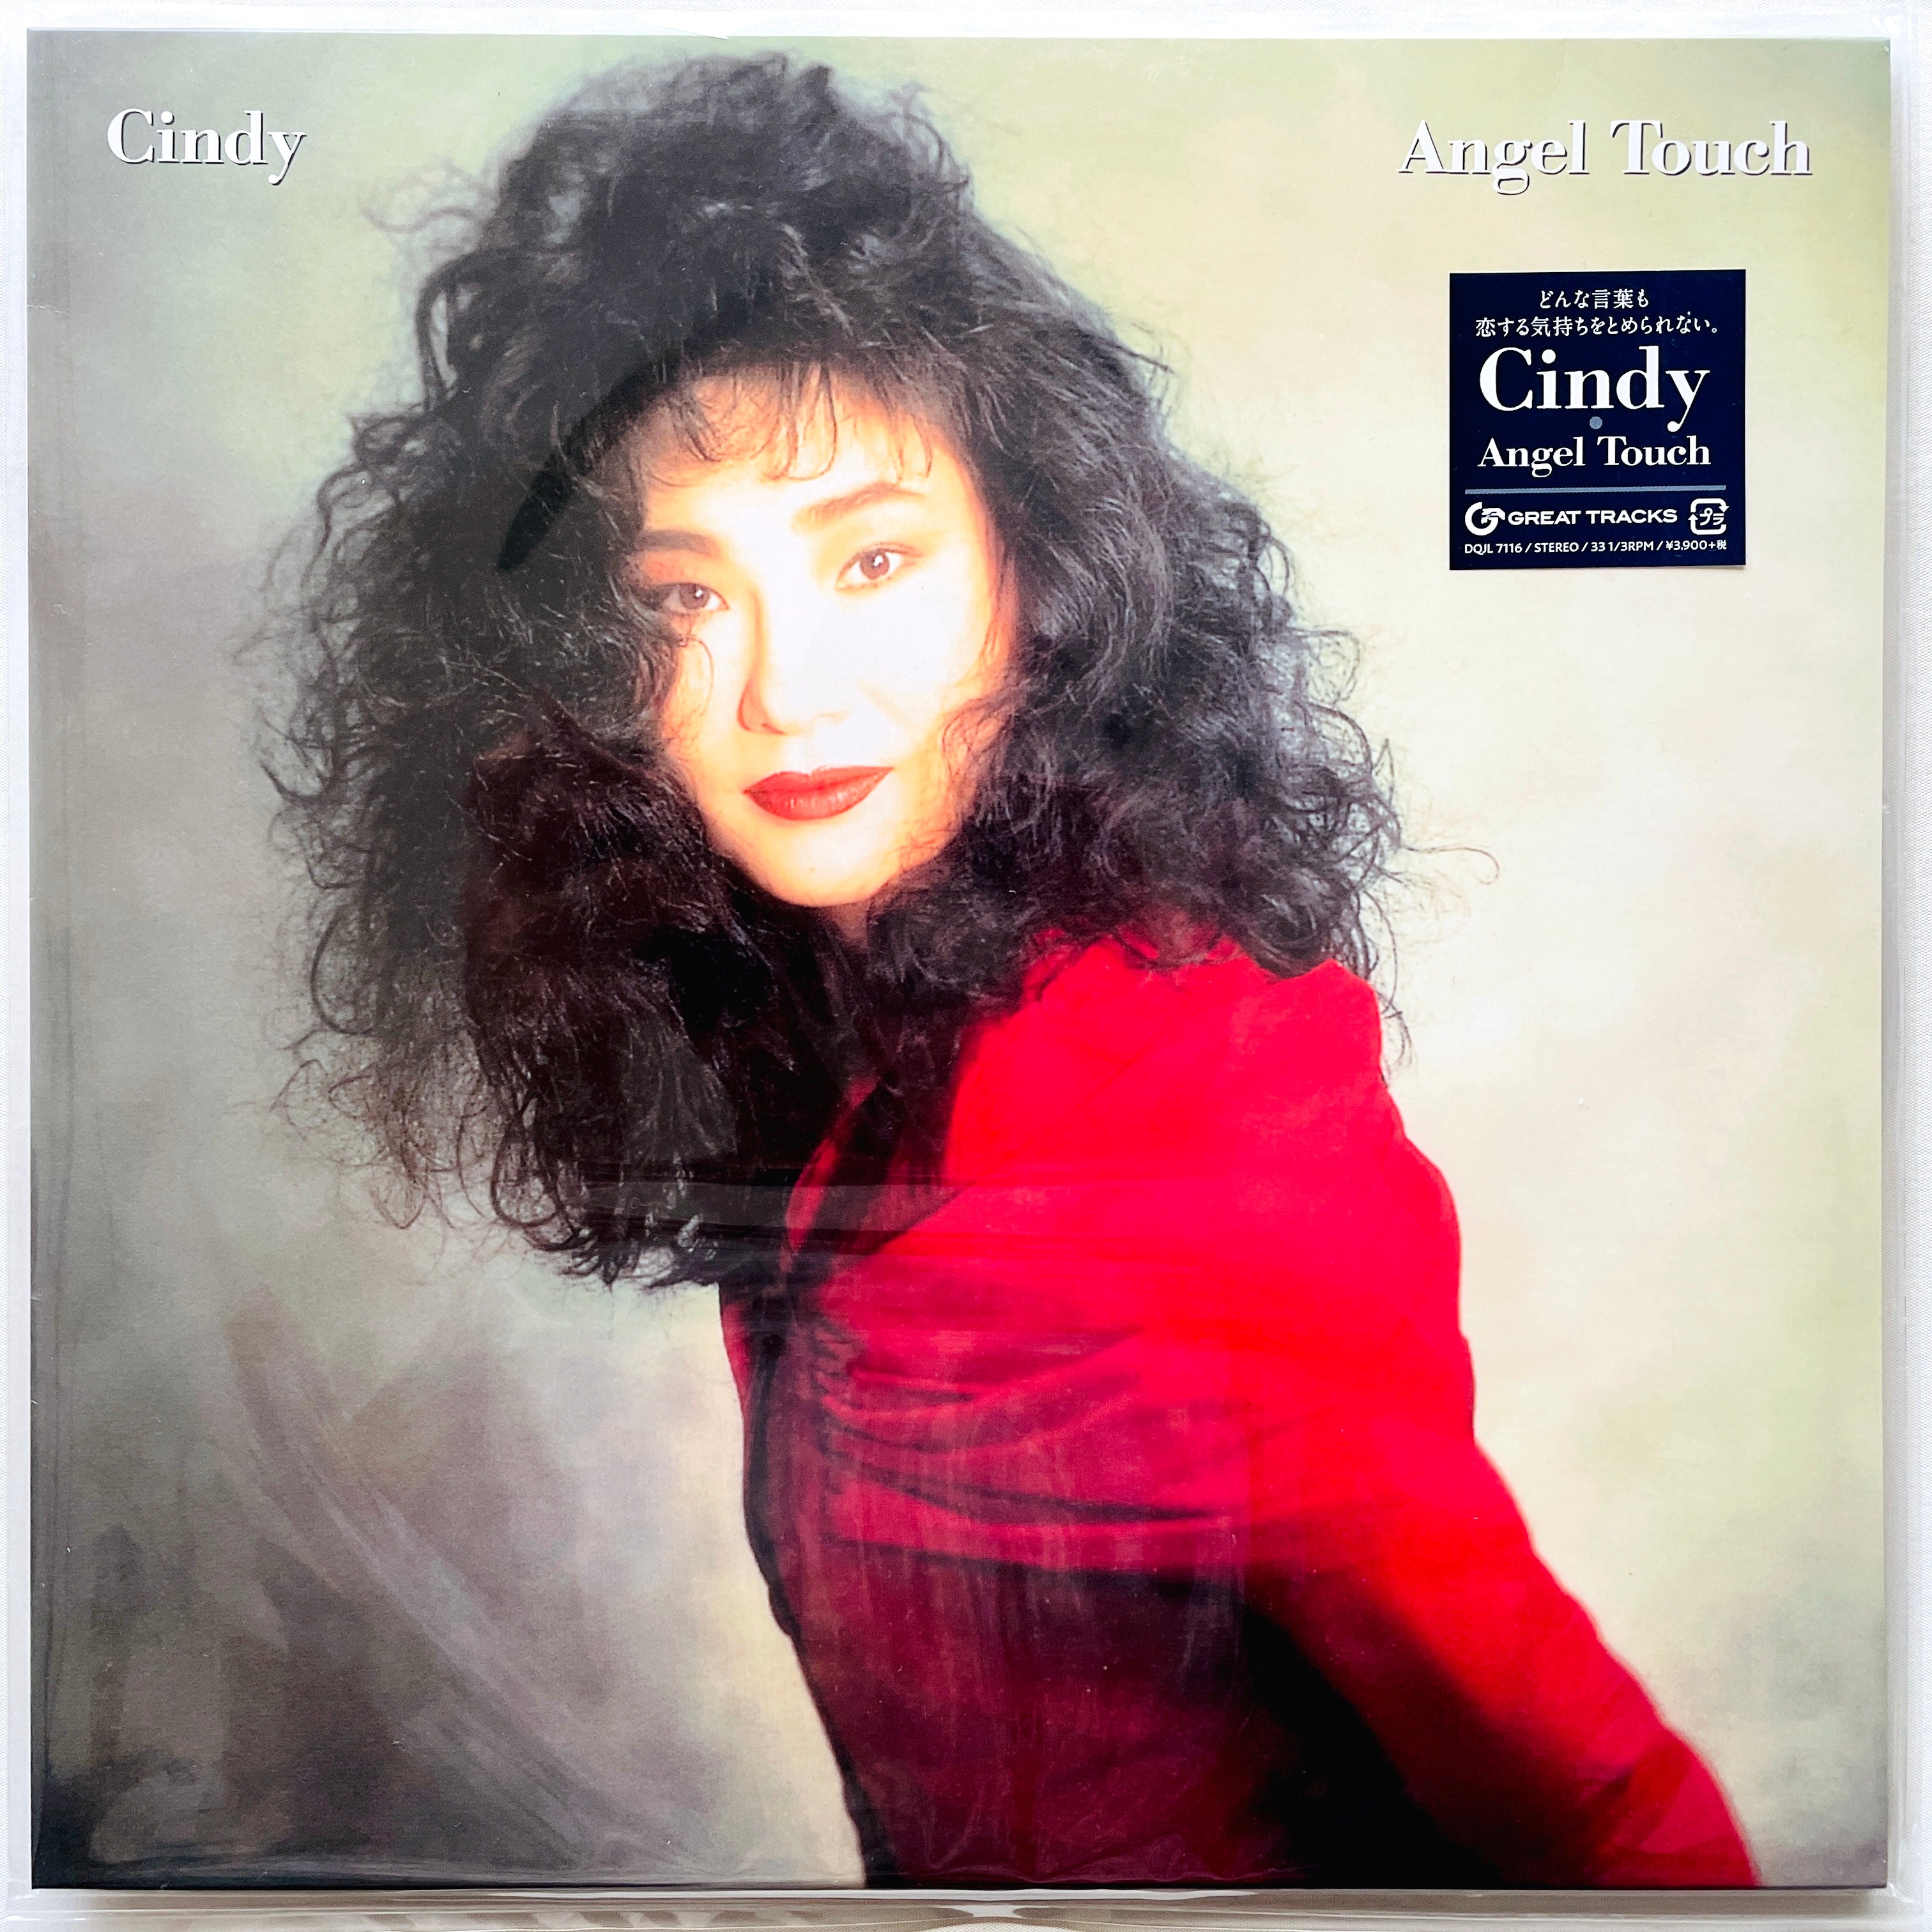 Cindy - Angel Touch